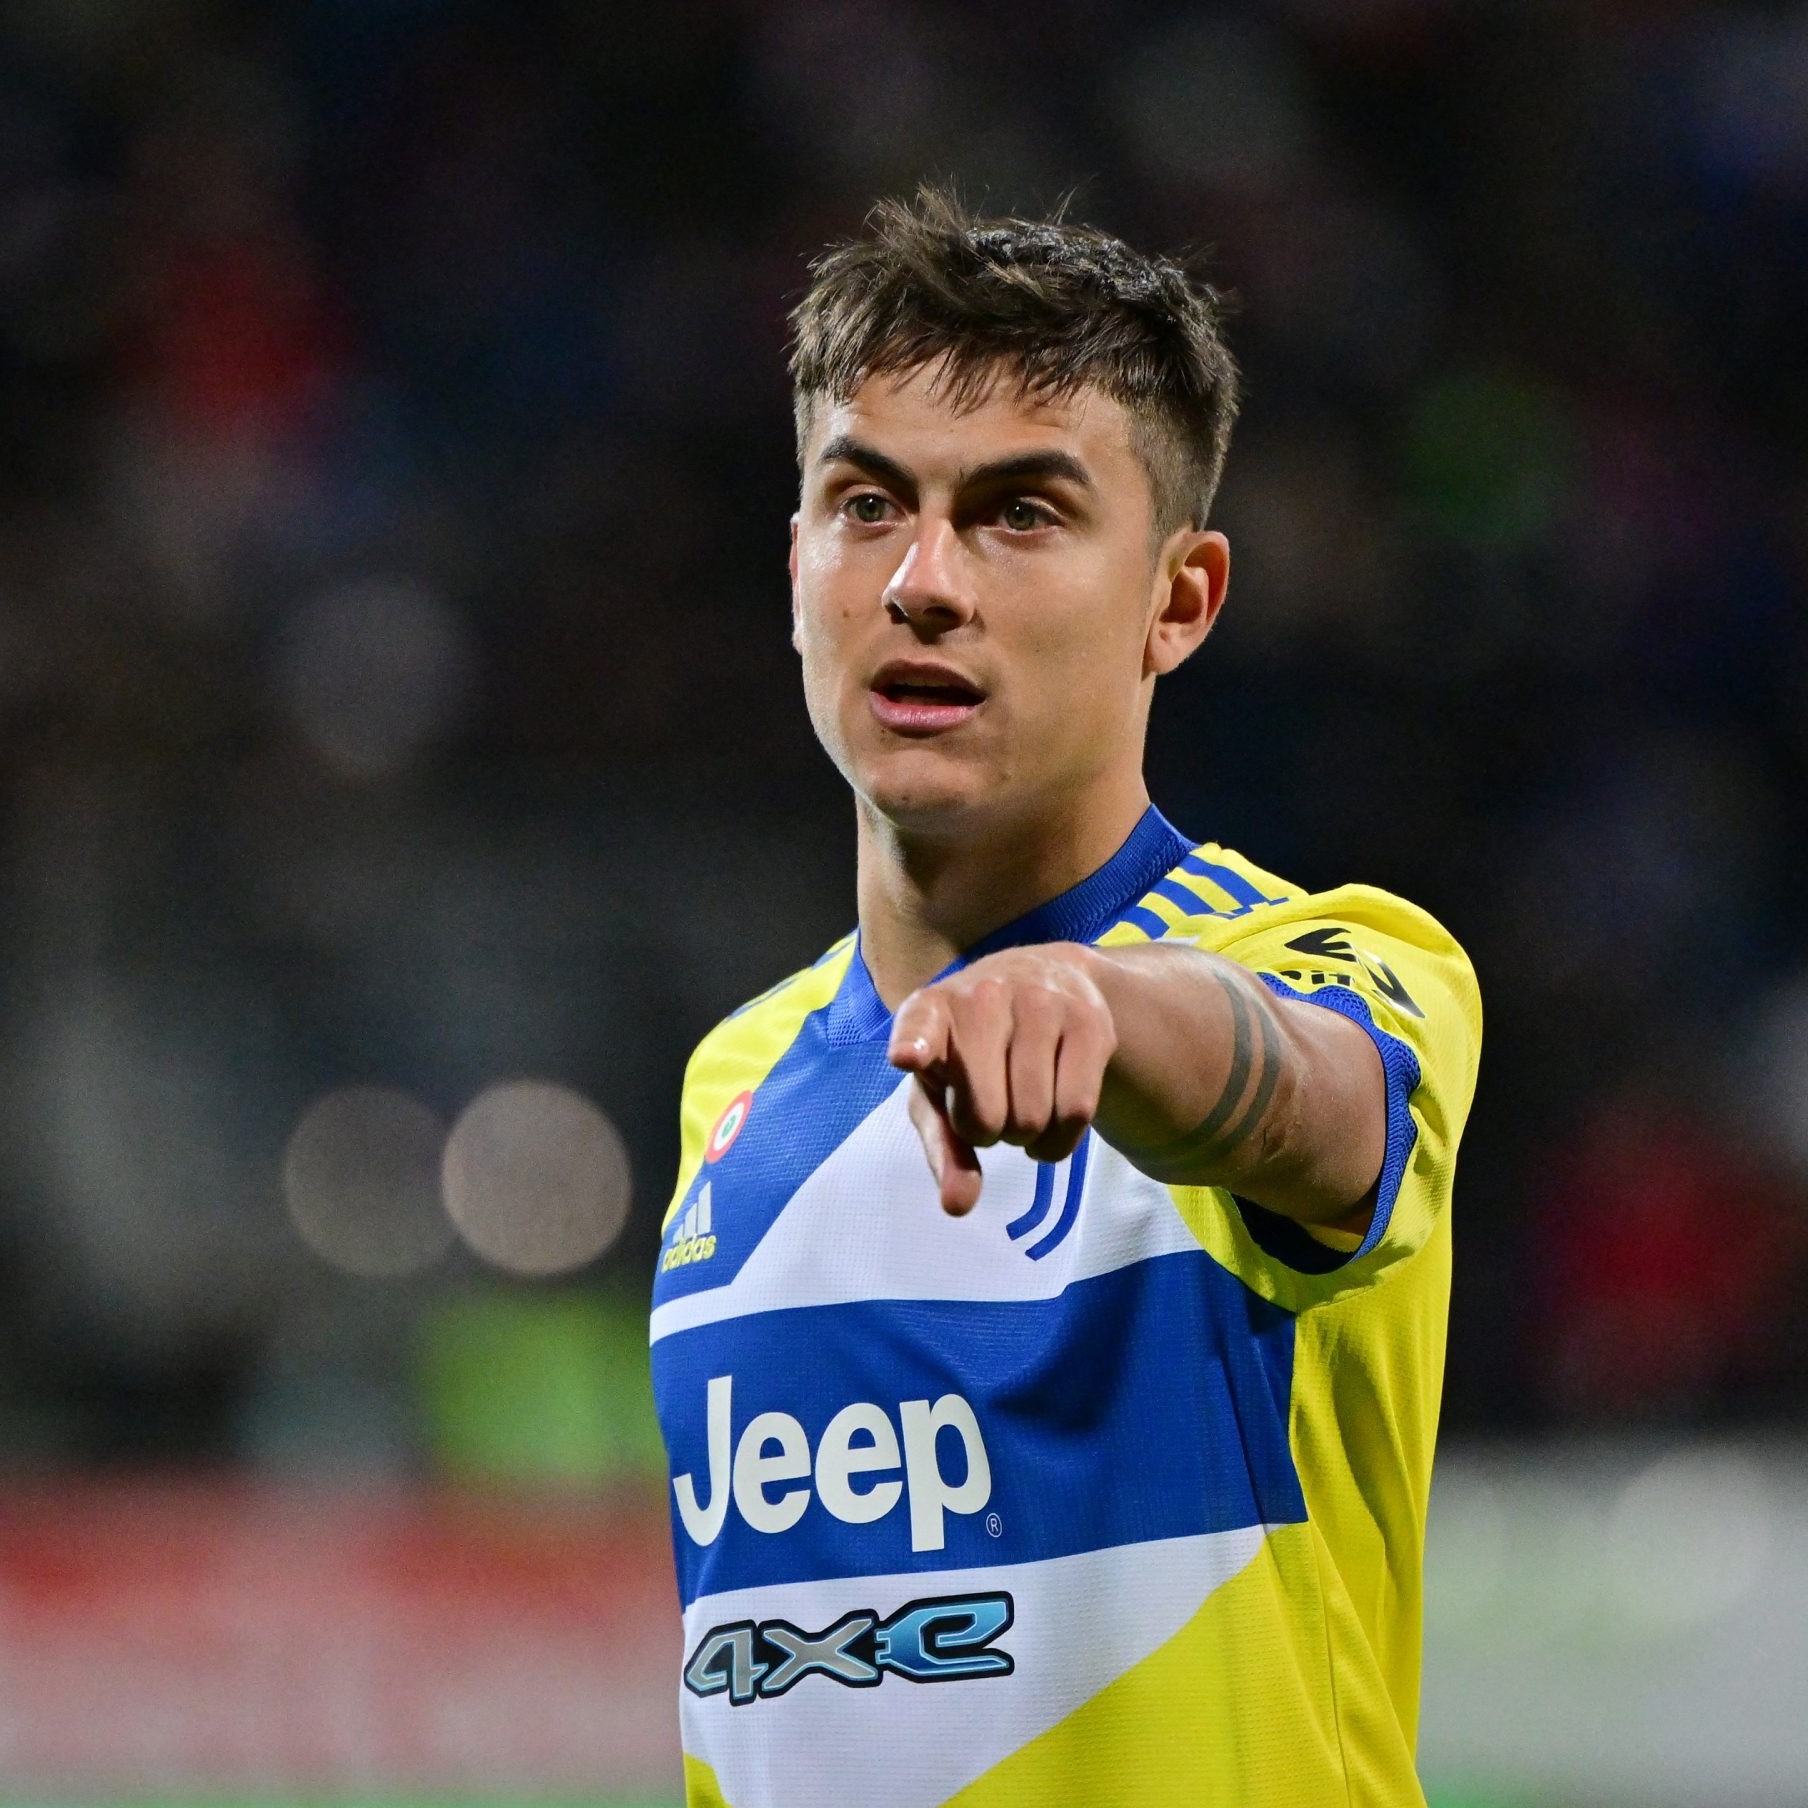 arsenal-and-tottenham-in-paulo-dybala-transfer-blow-as-juventus-star-holds-talks-with-inter-milan-over-free-move-scaled.jpg